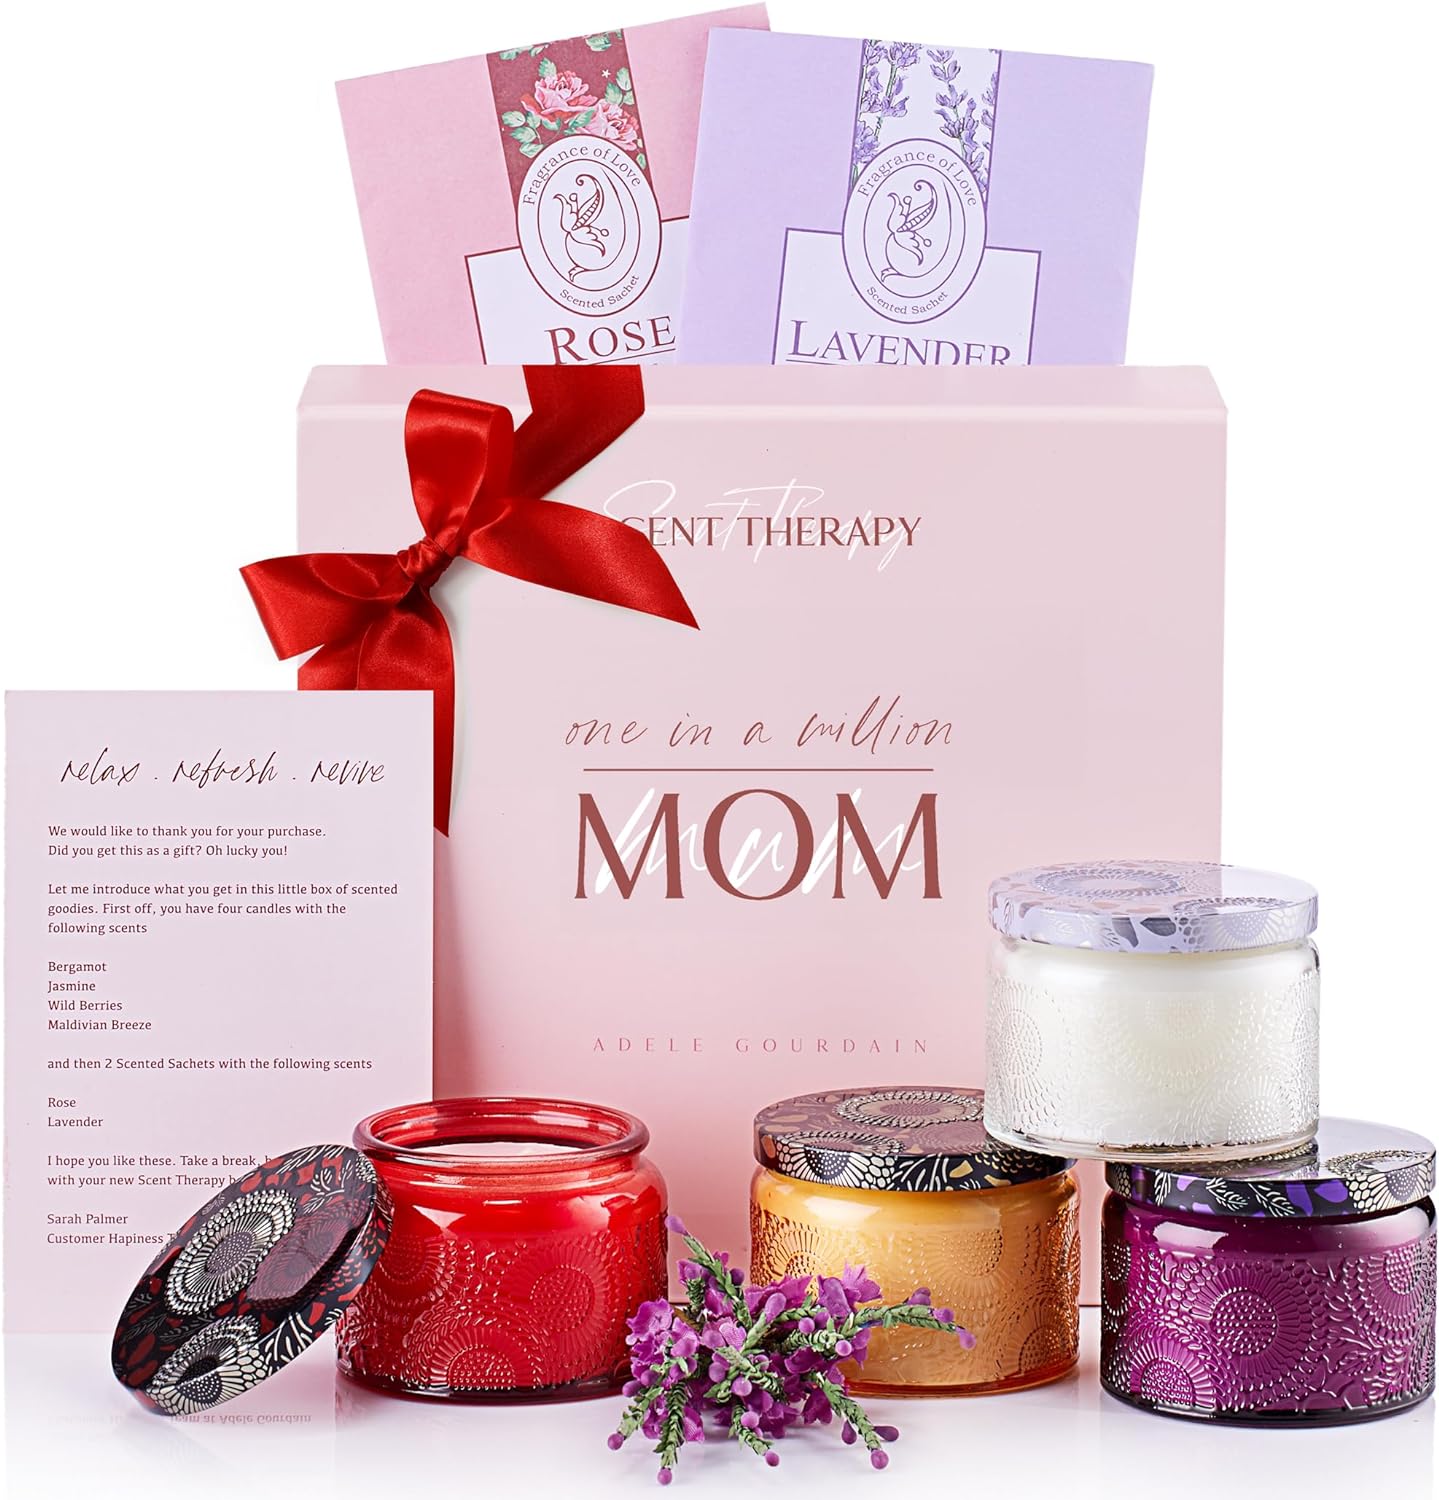 Scented Candle Gift Set for Mom - 4 Long Lasting Aromatherapy Candles in a Gift Box for Mother' Day or as Birthday Gift for Mothers - Personal Presents for Women - Mom Gifts Ideas from Daughter/Son